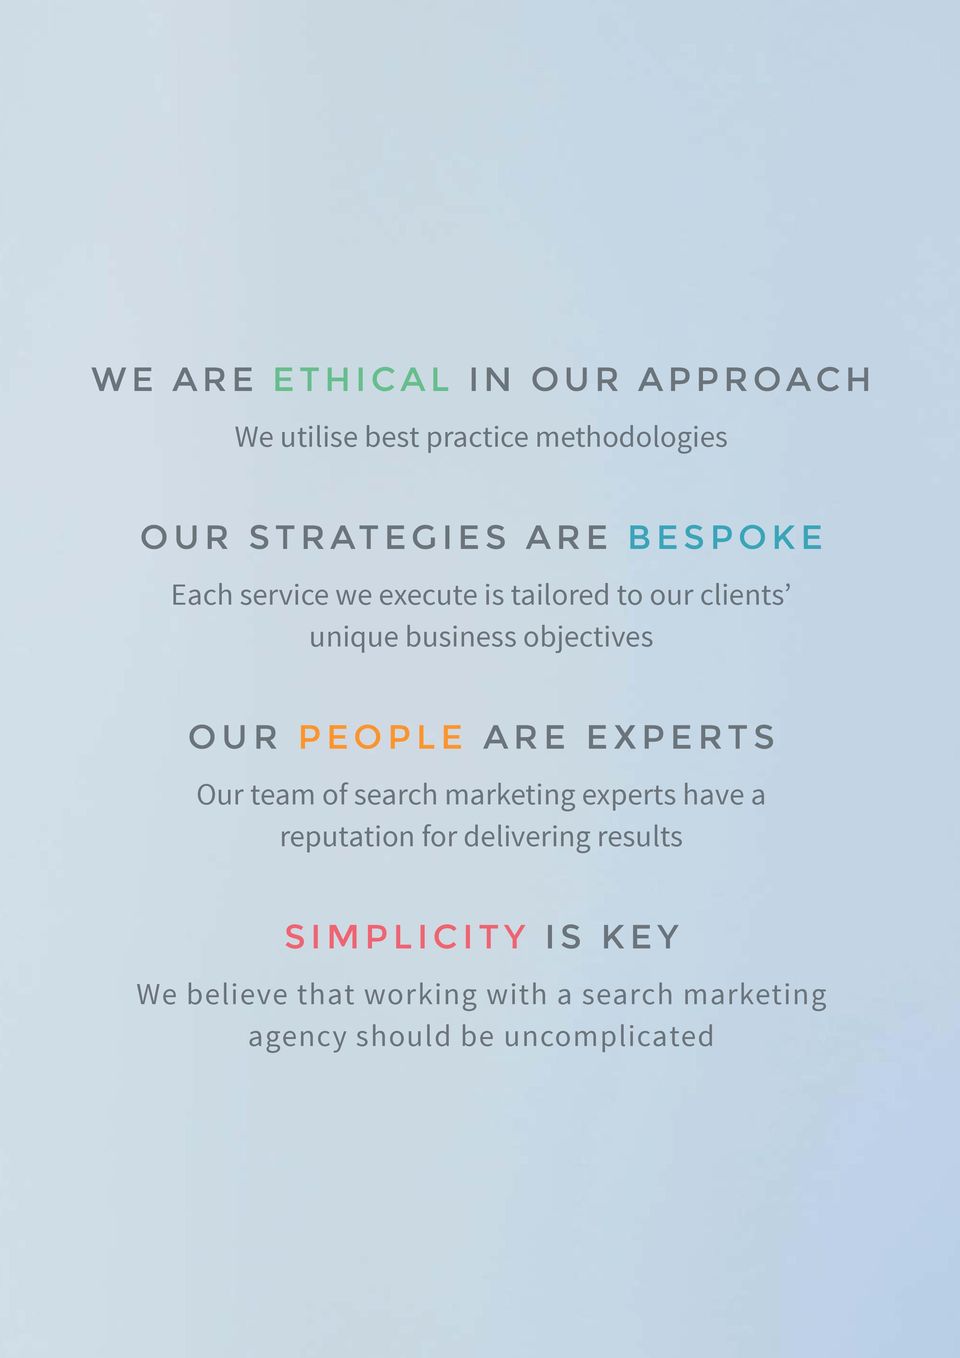 PEOPLE ARE EXPERTS Our team of search marketing experts have a reputation for delivering